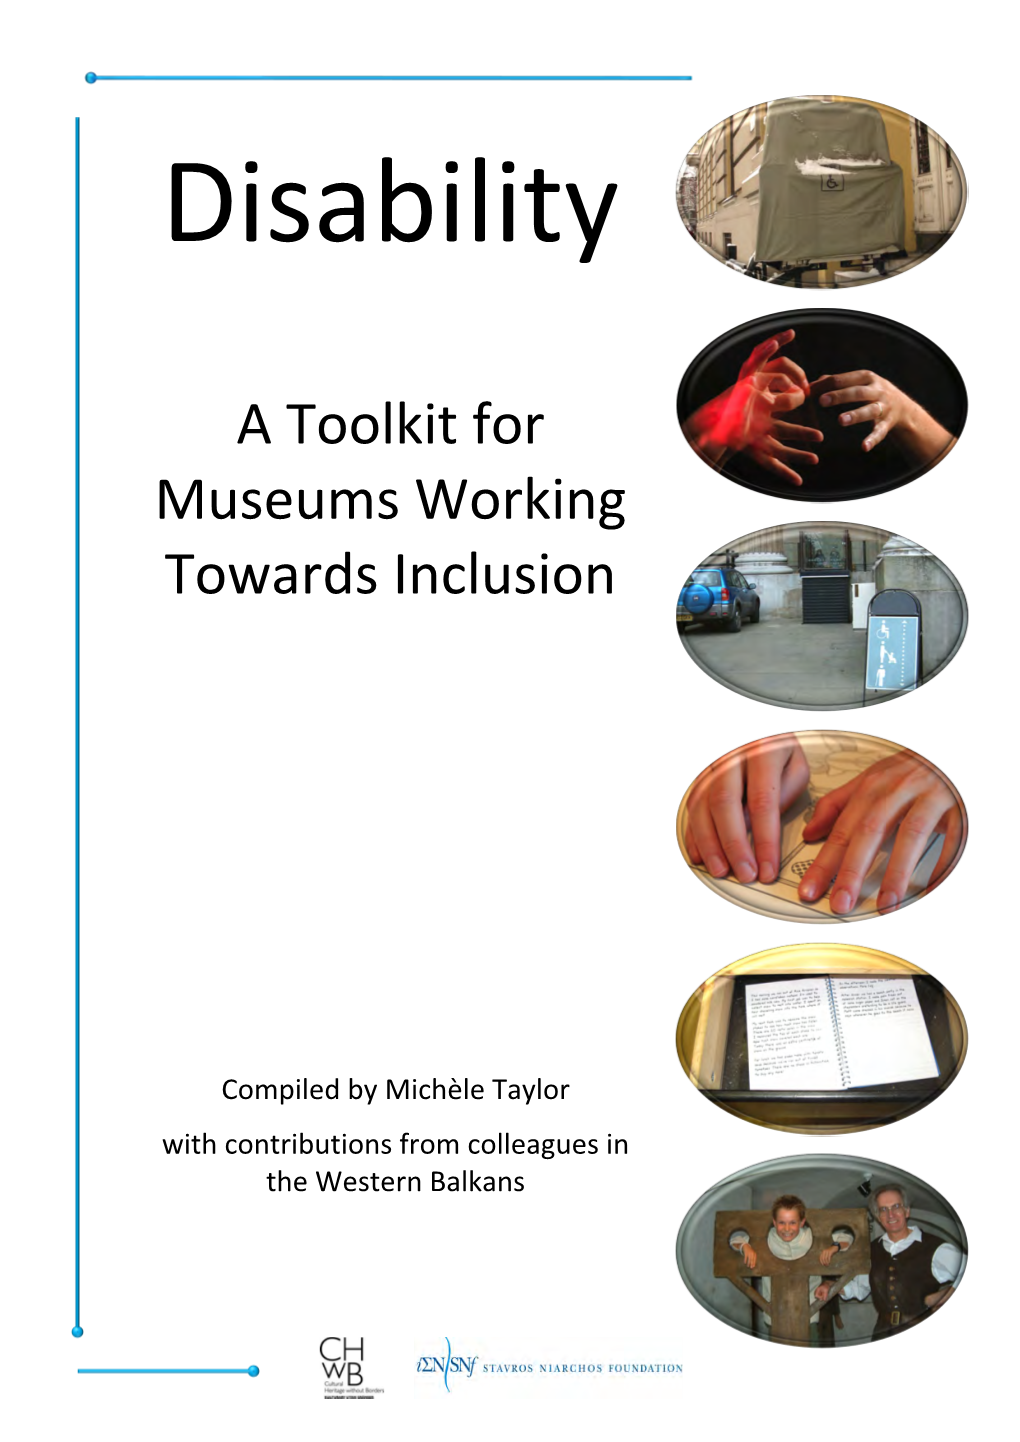 A Toolkit for Museums Working Towards Inclusion